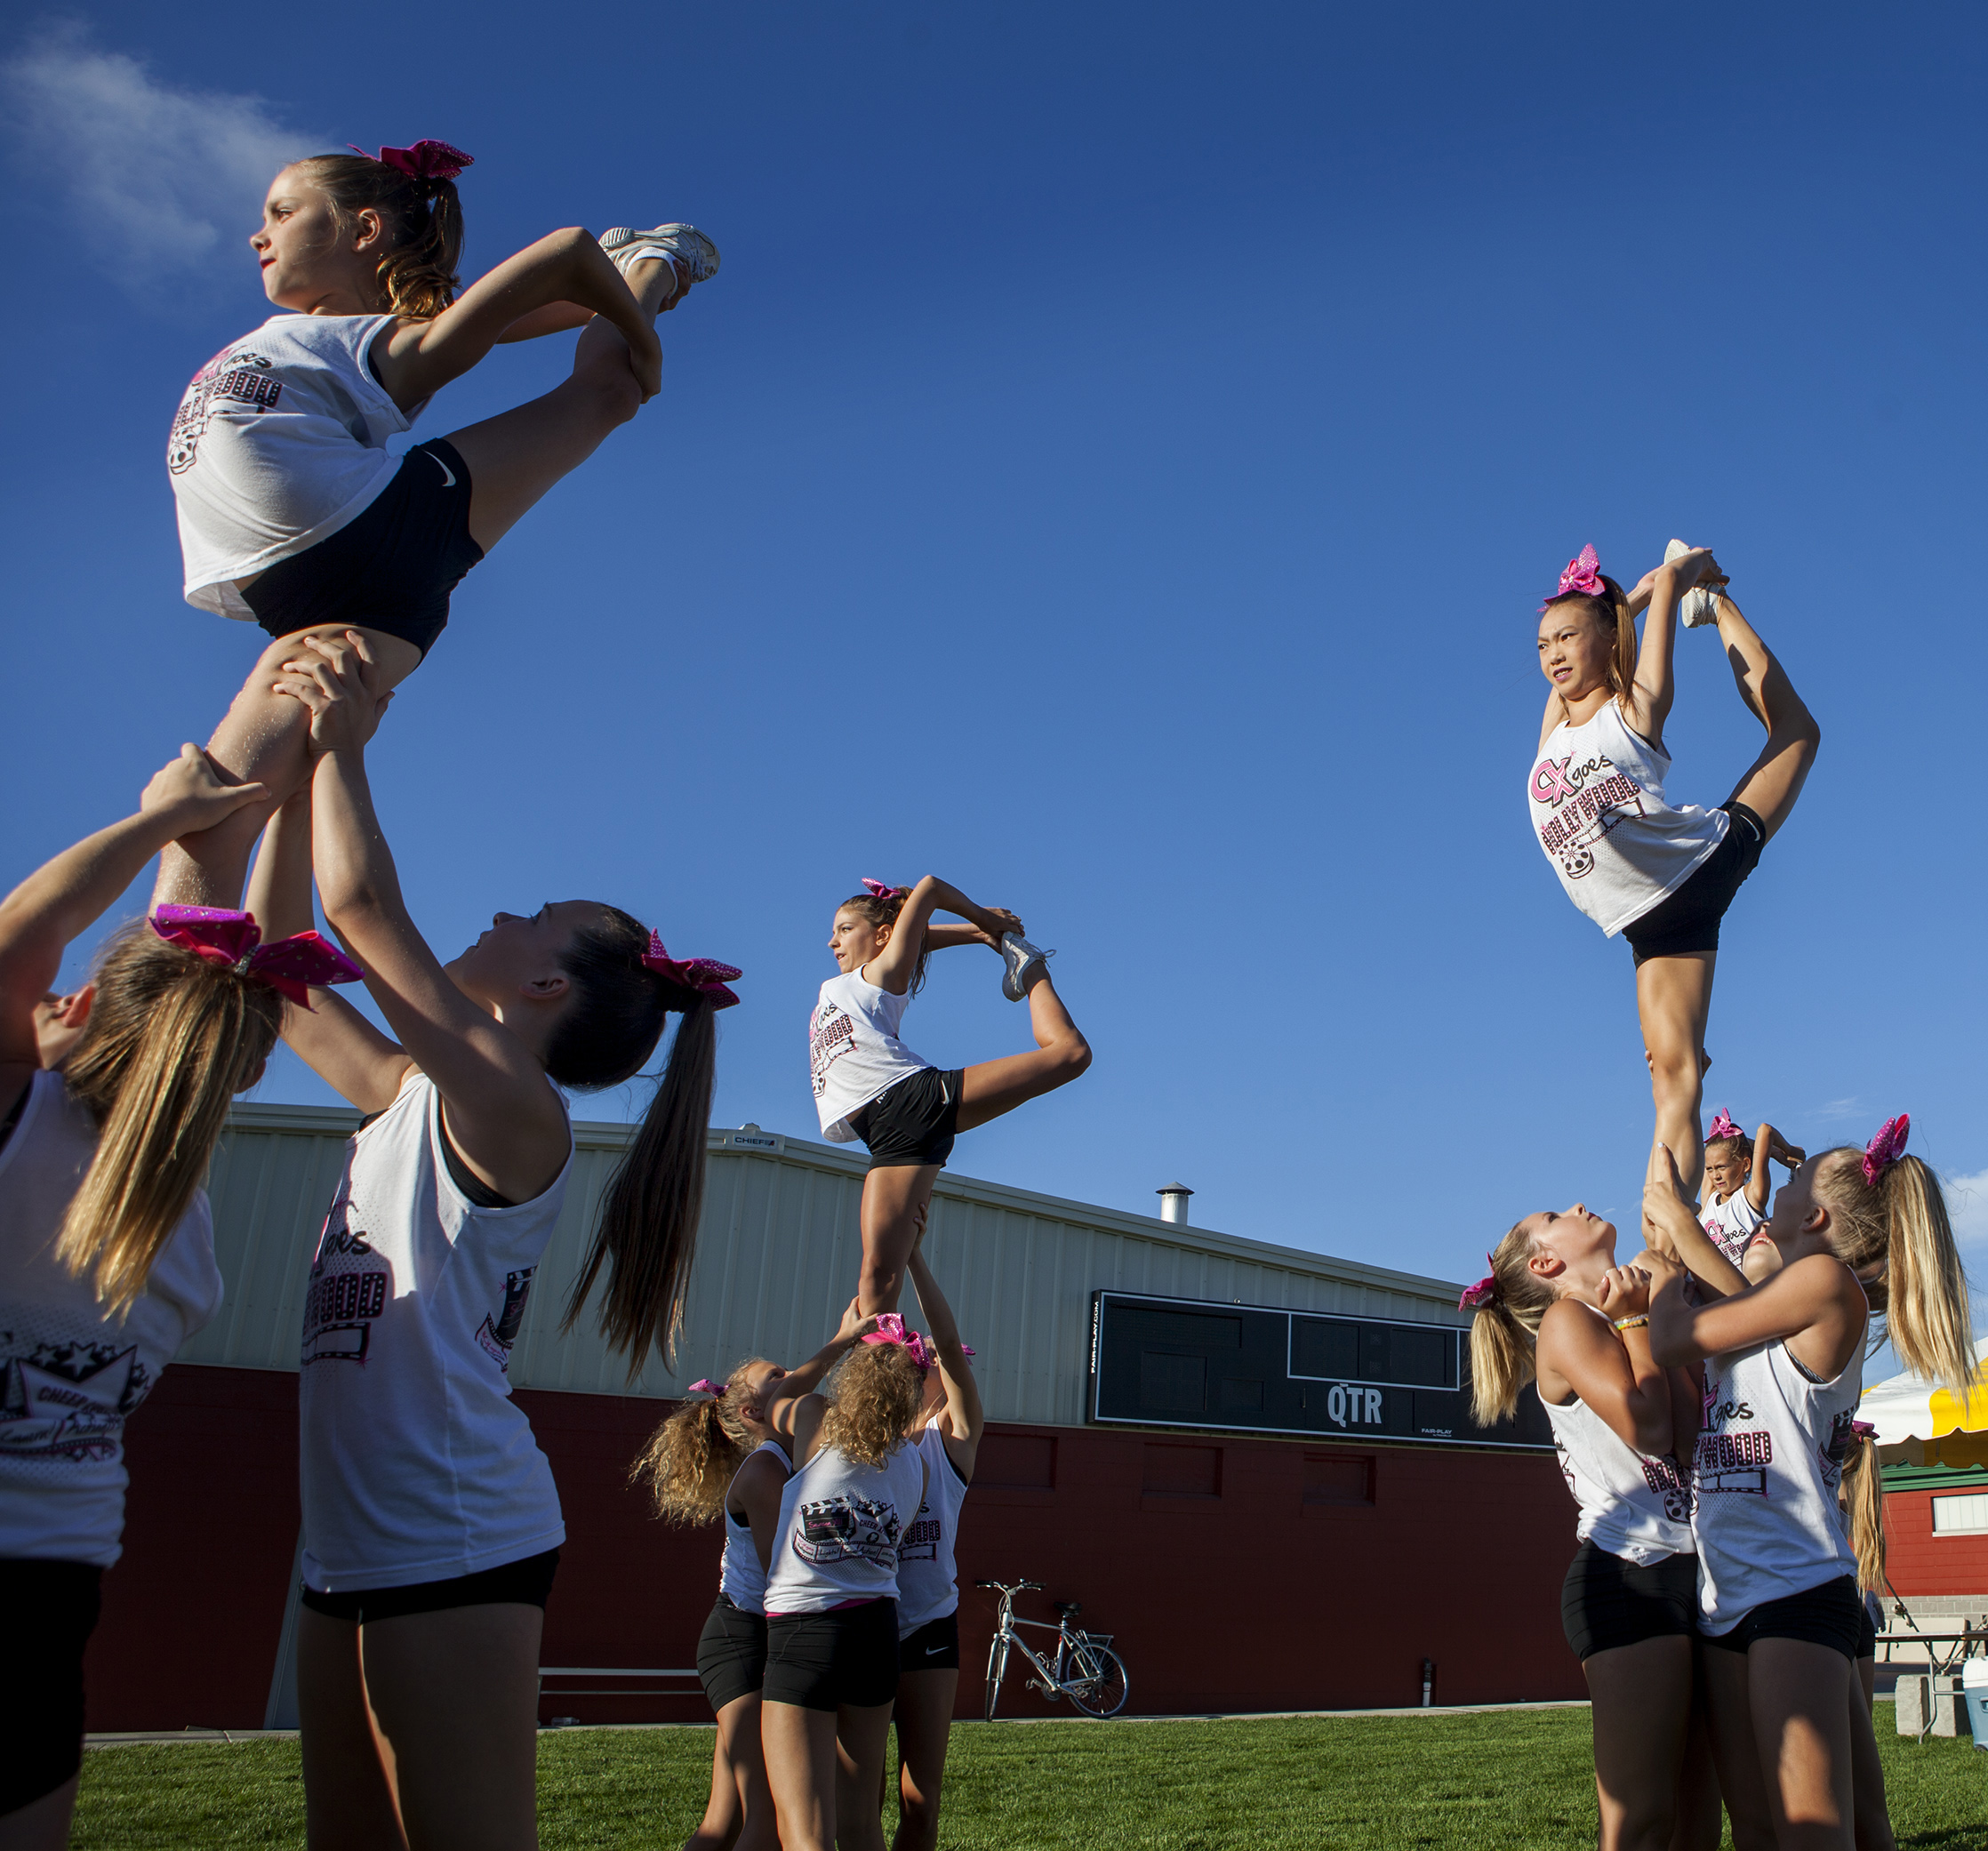  Cheer Xpress members, ages 9-15, practice their routine before the opening ceremonies of the Cornhusker State Games on July 15, 2016, at Seacrest Field in Lincoln, Neb. 